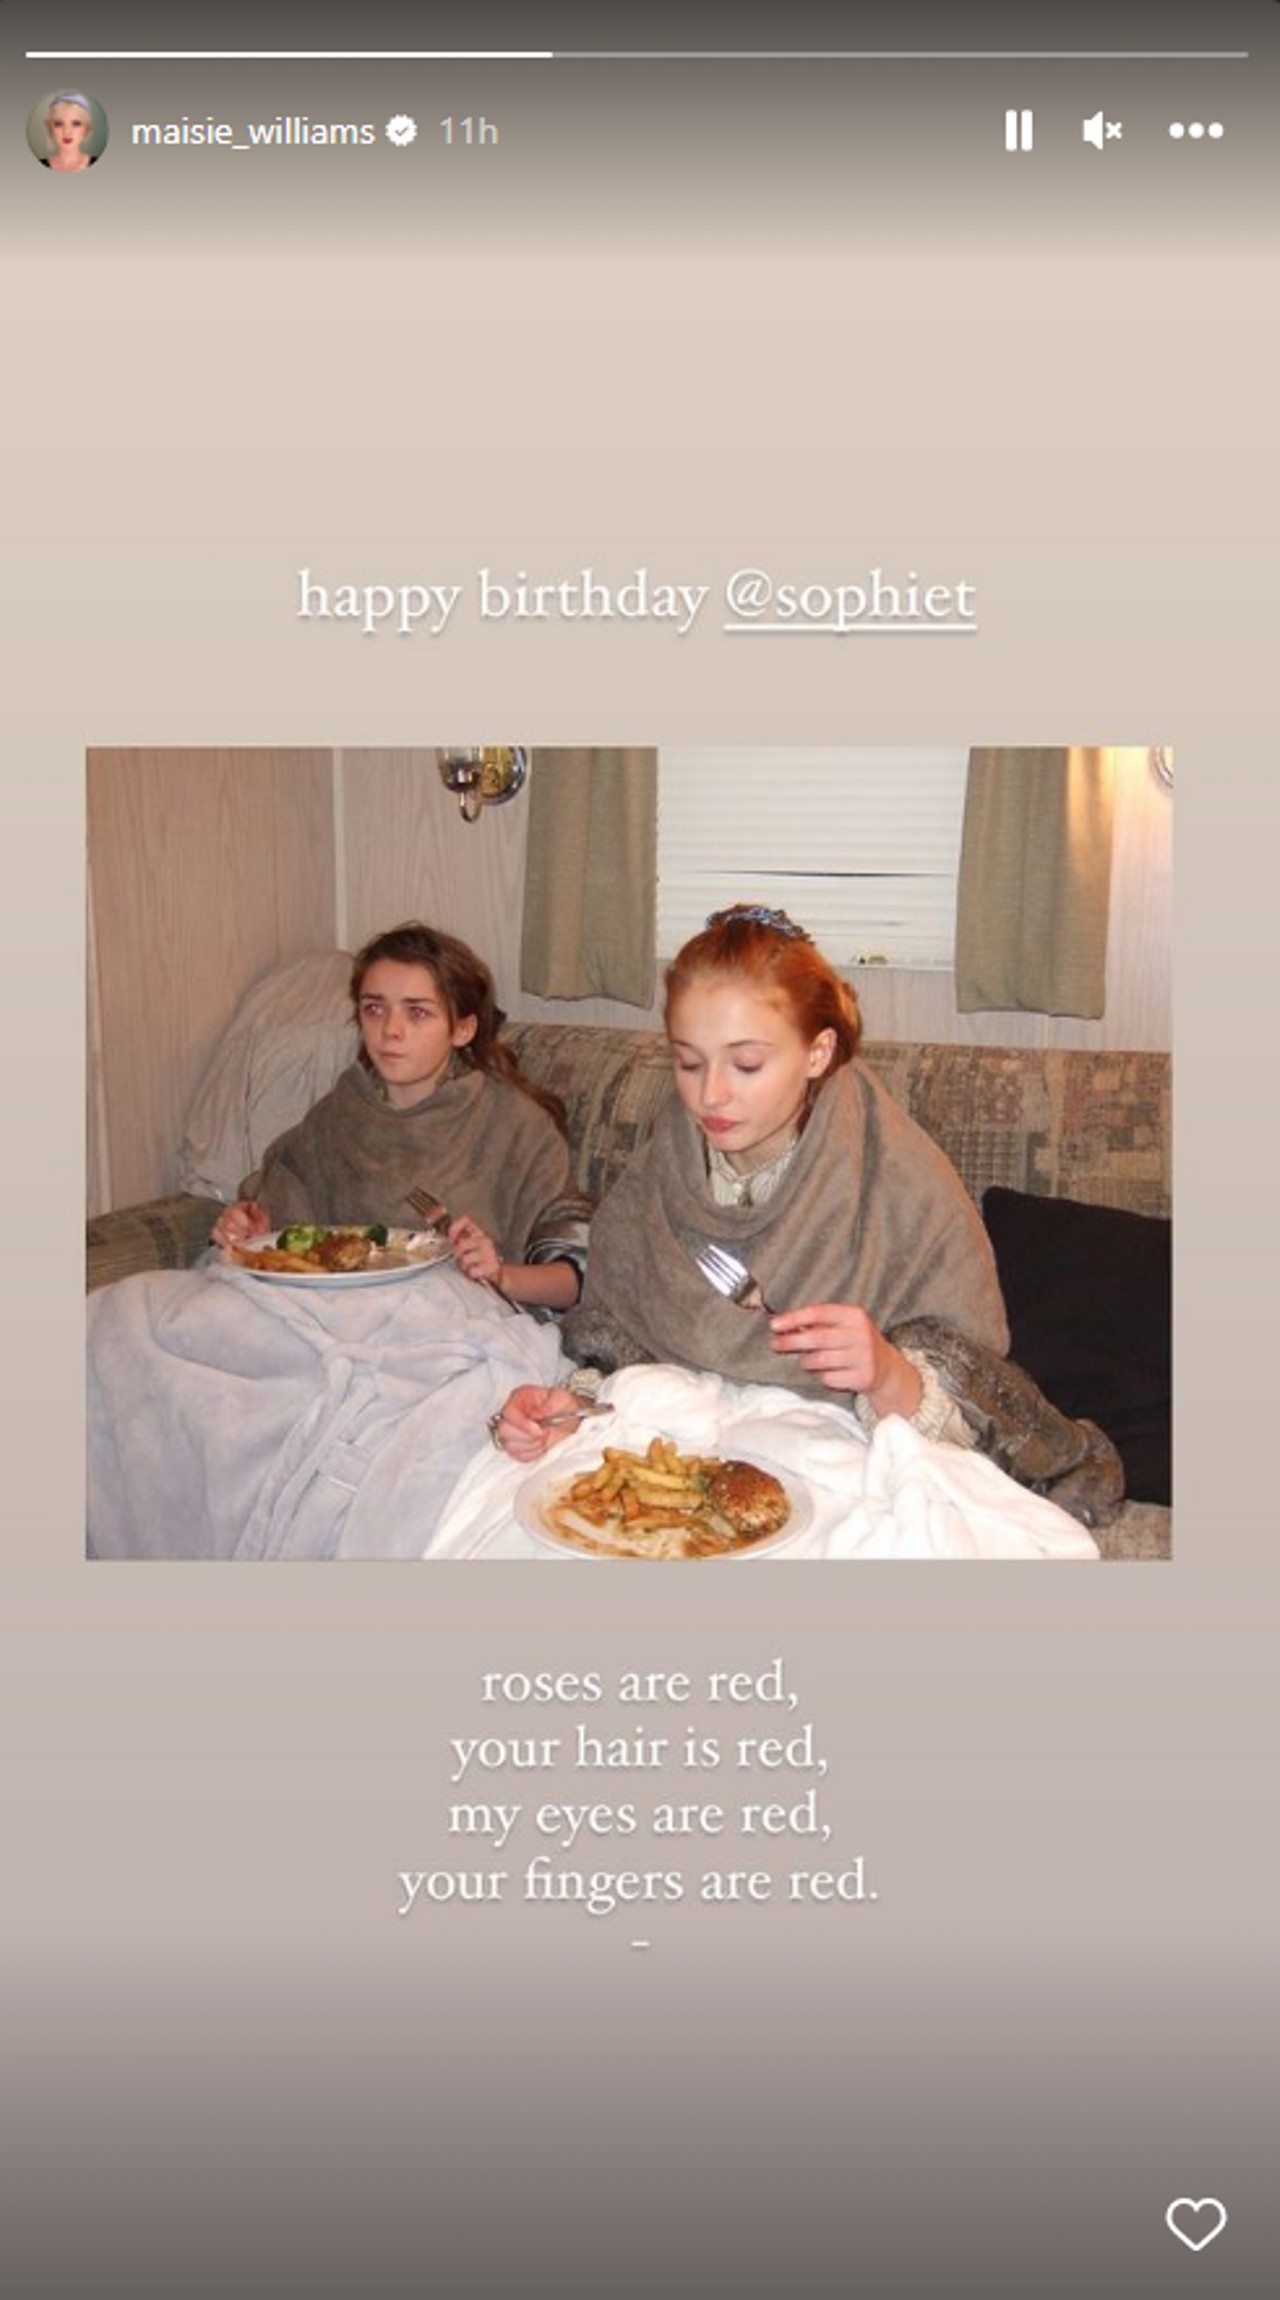 Maisie Williams wishes Sophie Turner happy birthday by posting throwback photo and a poem.